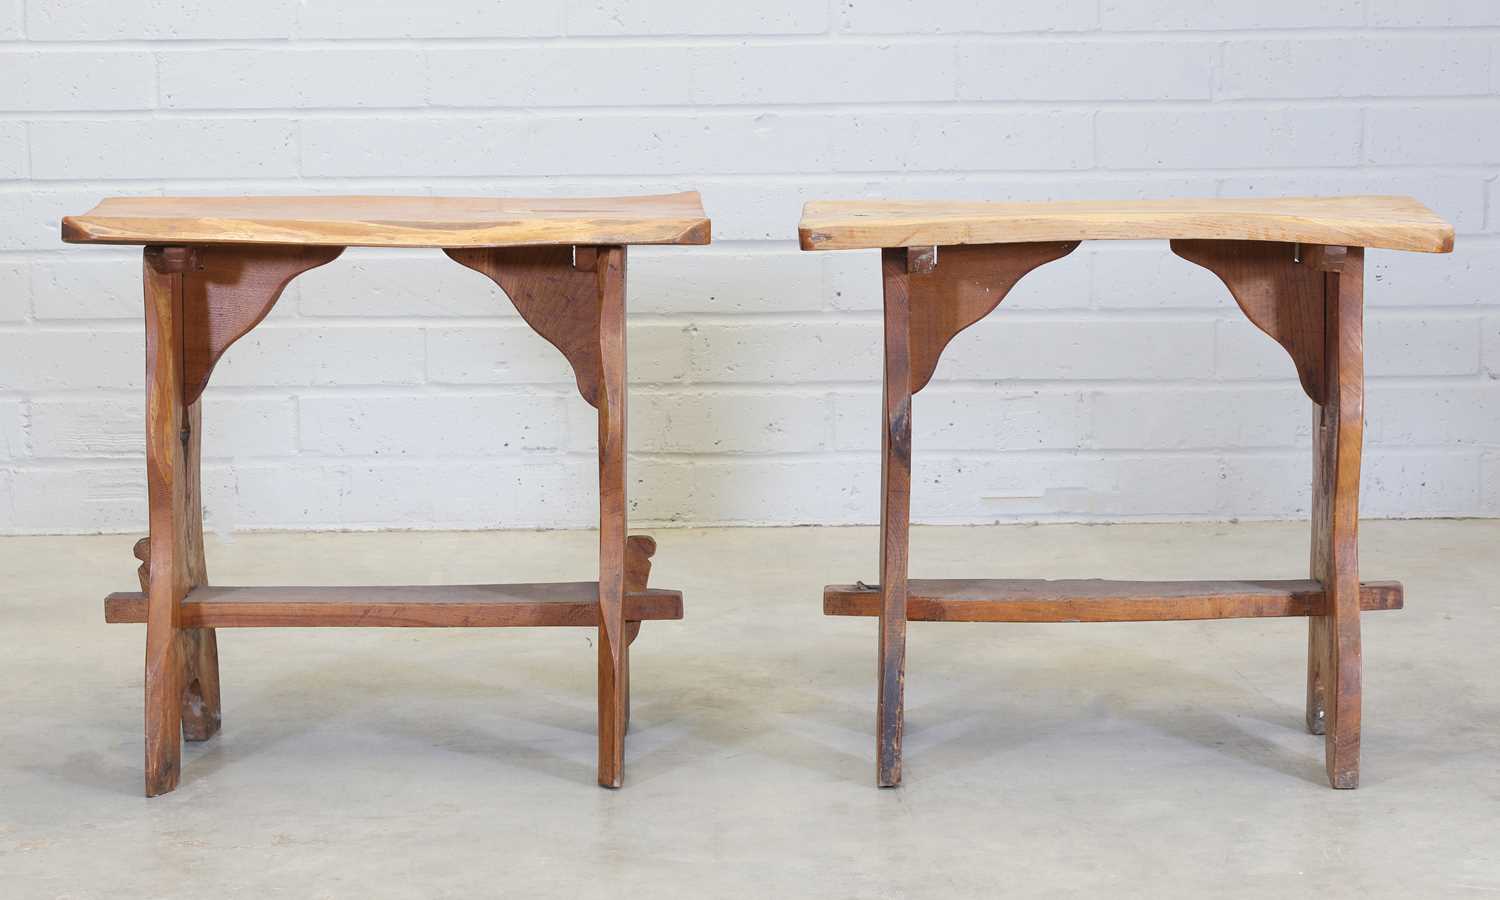 Two similar wood block side tables, - Image 2 of 2